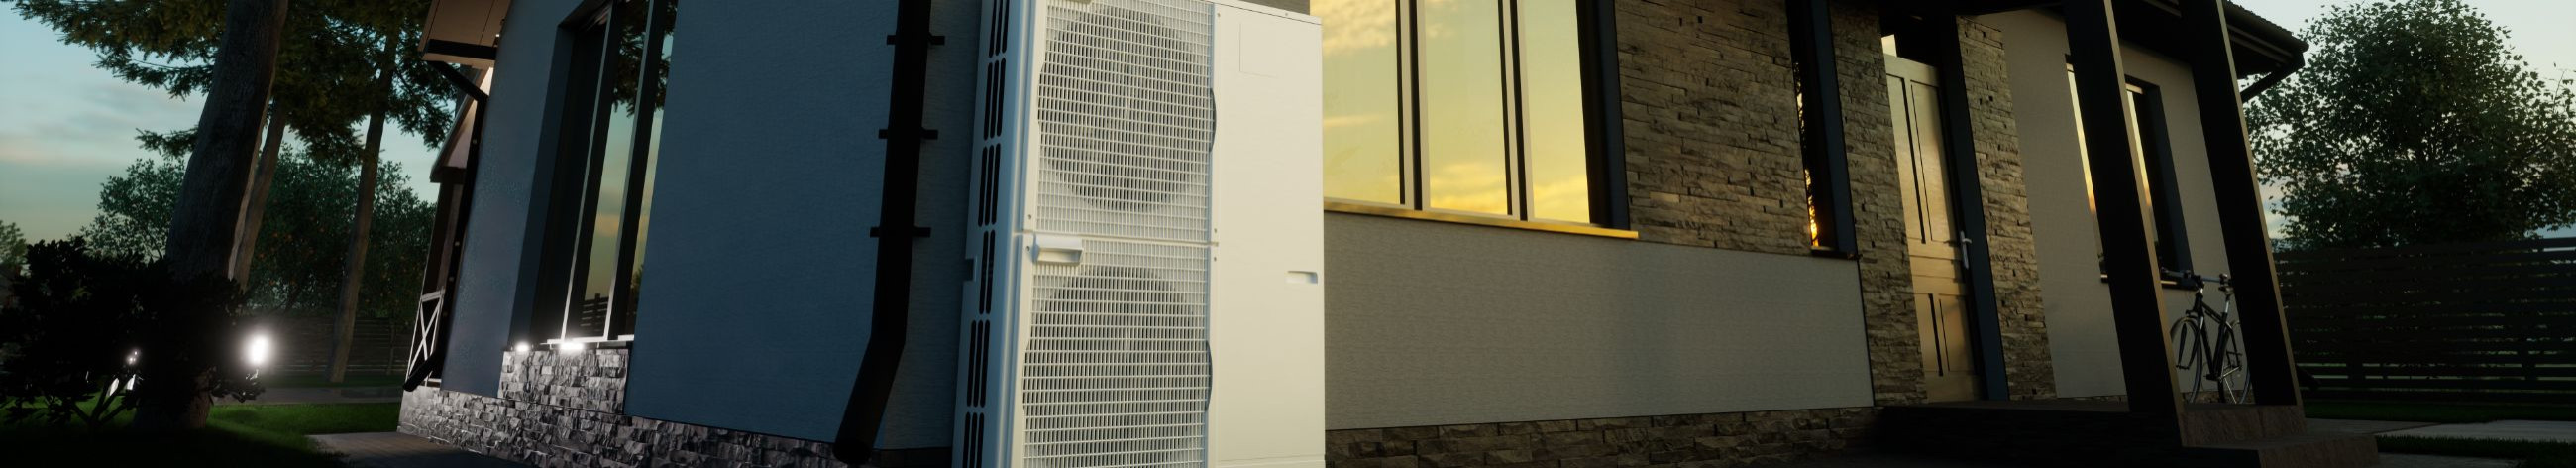 We specialize in advanced heating systems, including ES Energy Clay air-water heat pumps, and offer comprehensive support for energy-saving products.